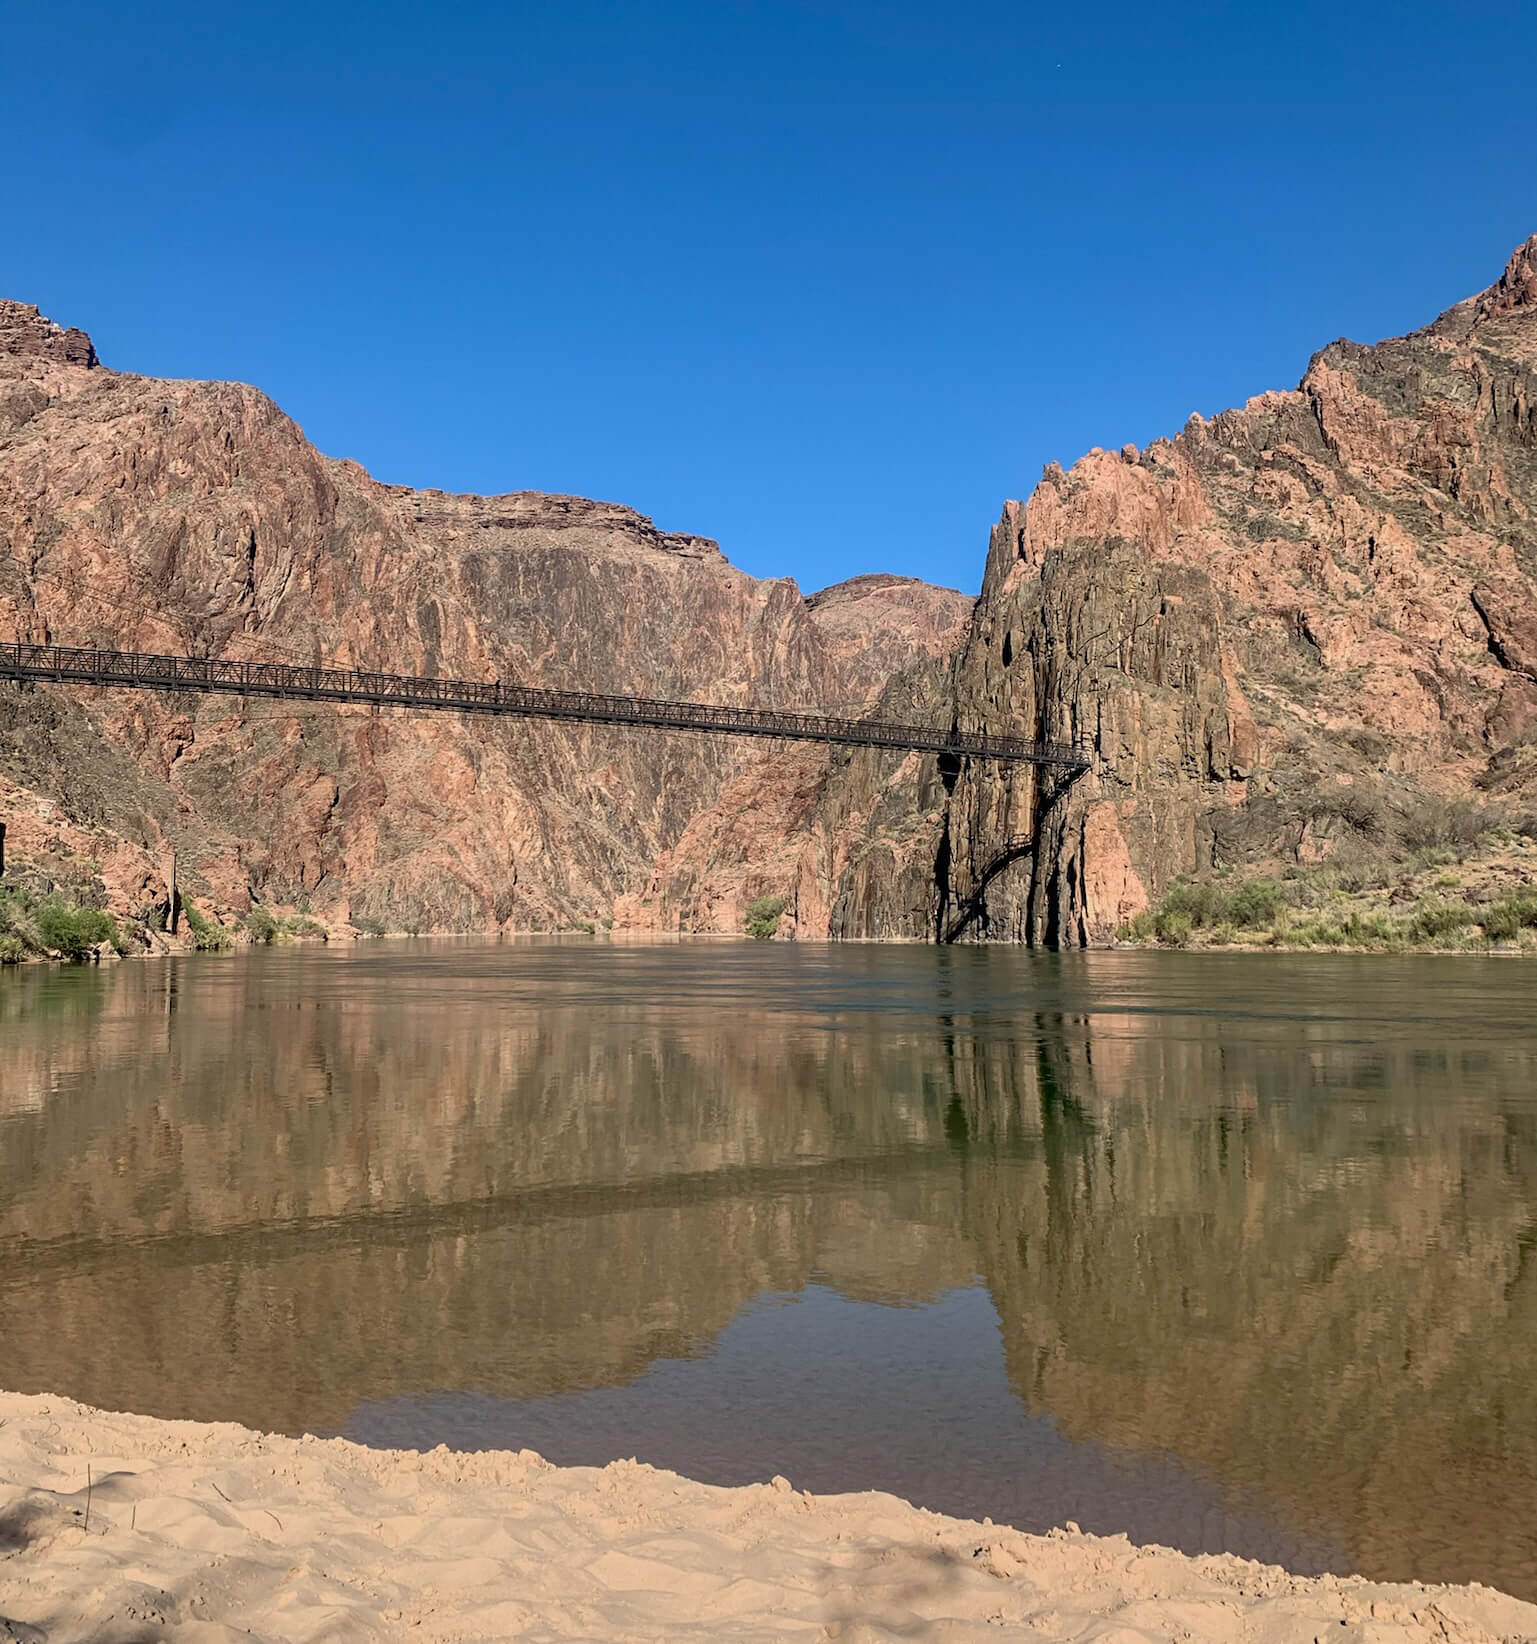 Black Bridge Over the Colorado River from Boat Beach in the Grand Canyon